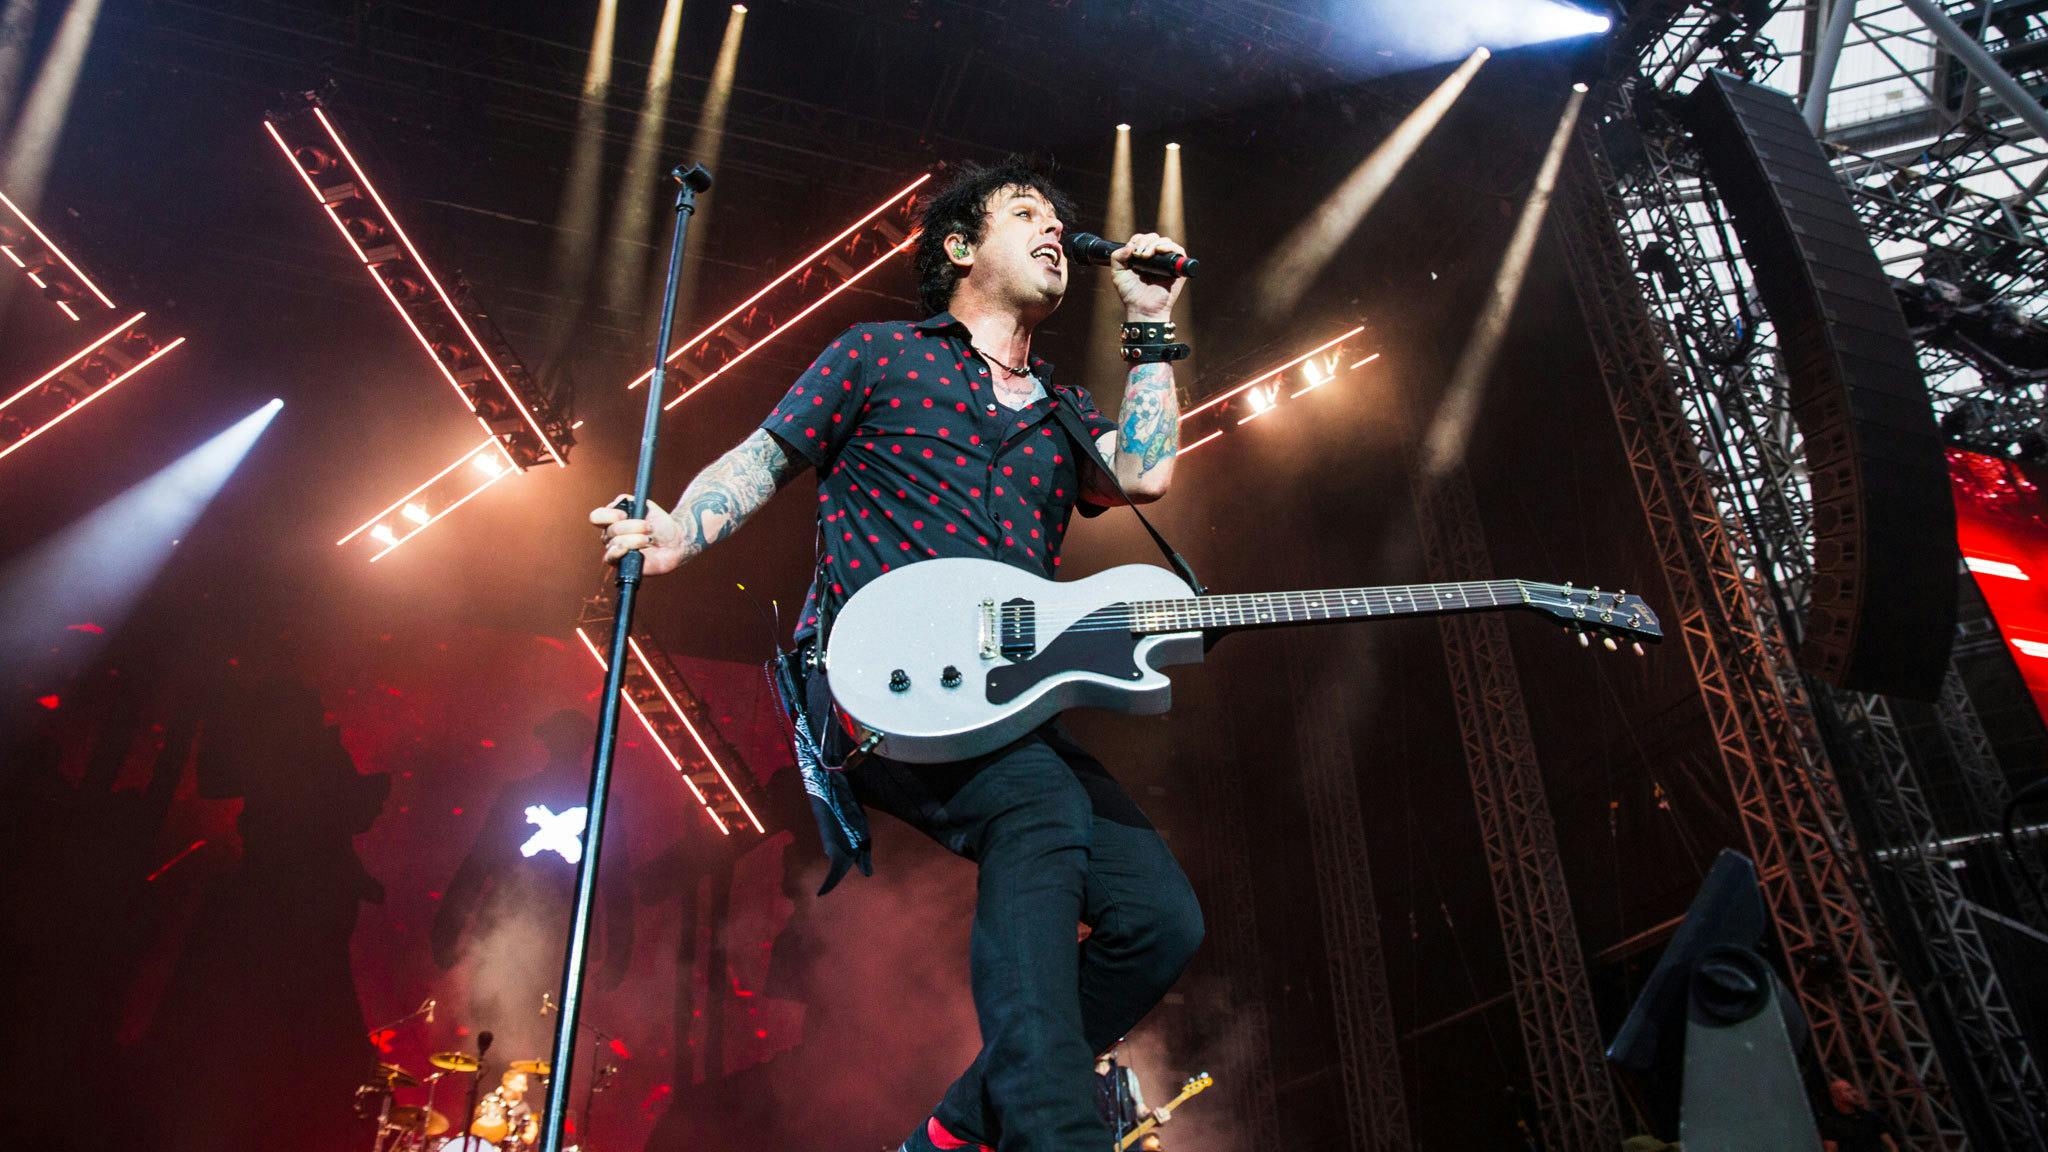 Here’s the incredible setlist from Green Day’s tiny Lollapalooza aftershow